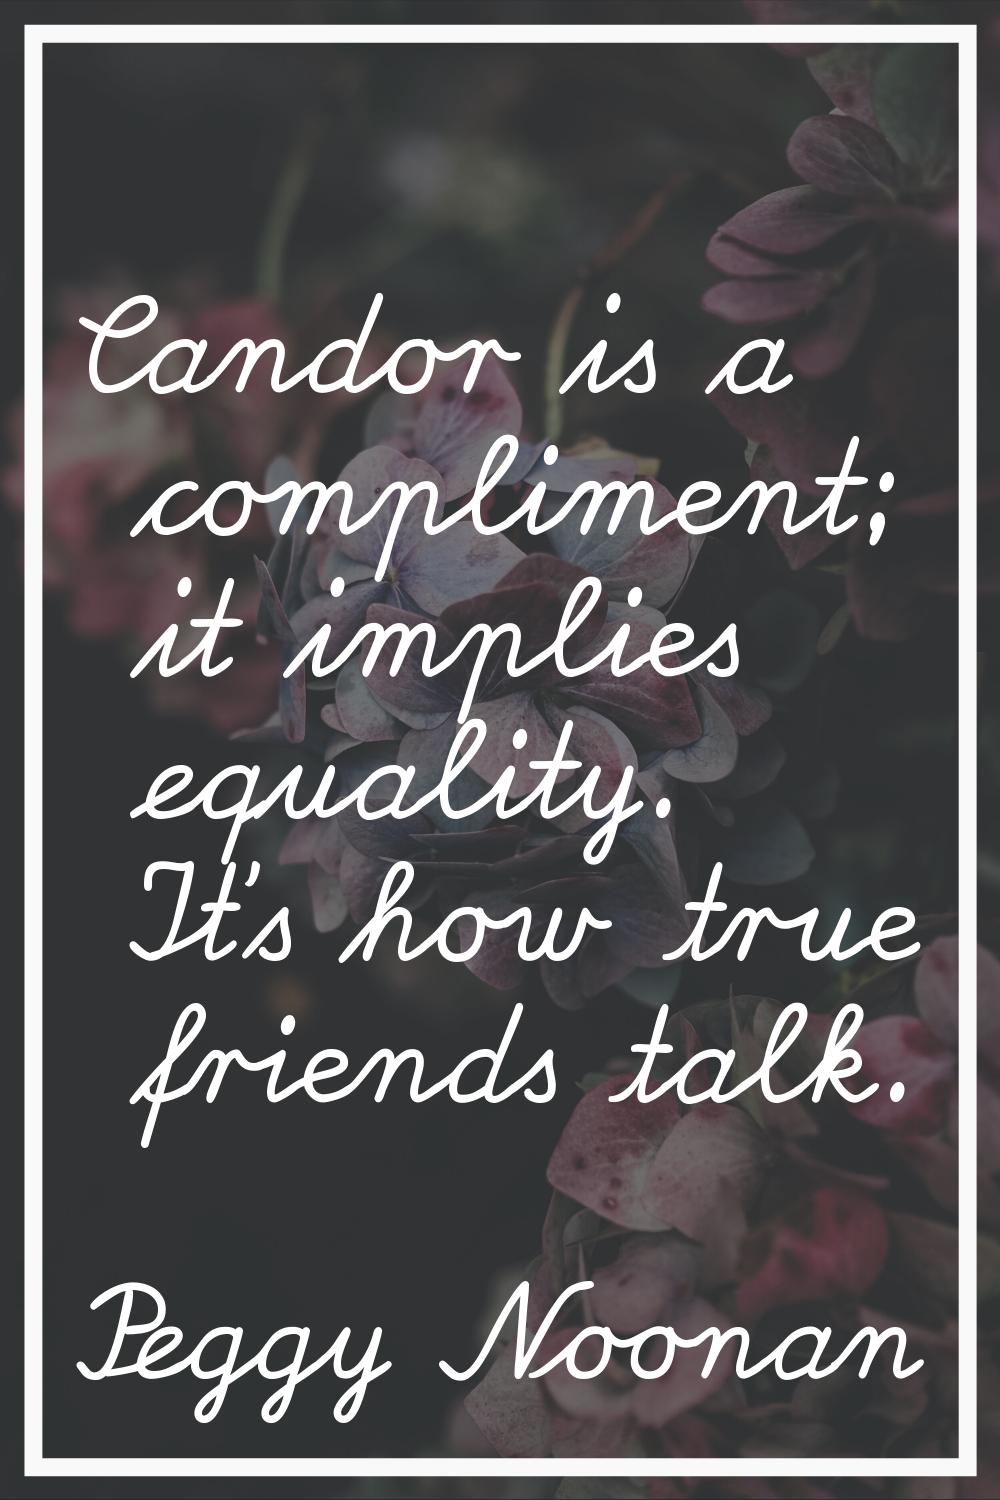 Candor is a compliment; it implies equality. It's how true friends talk.